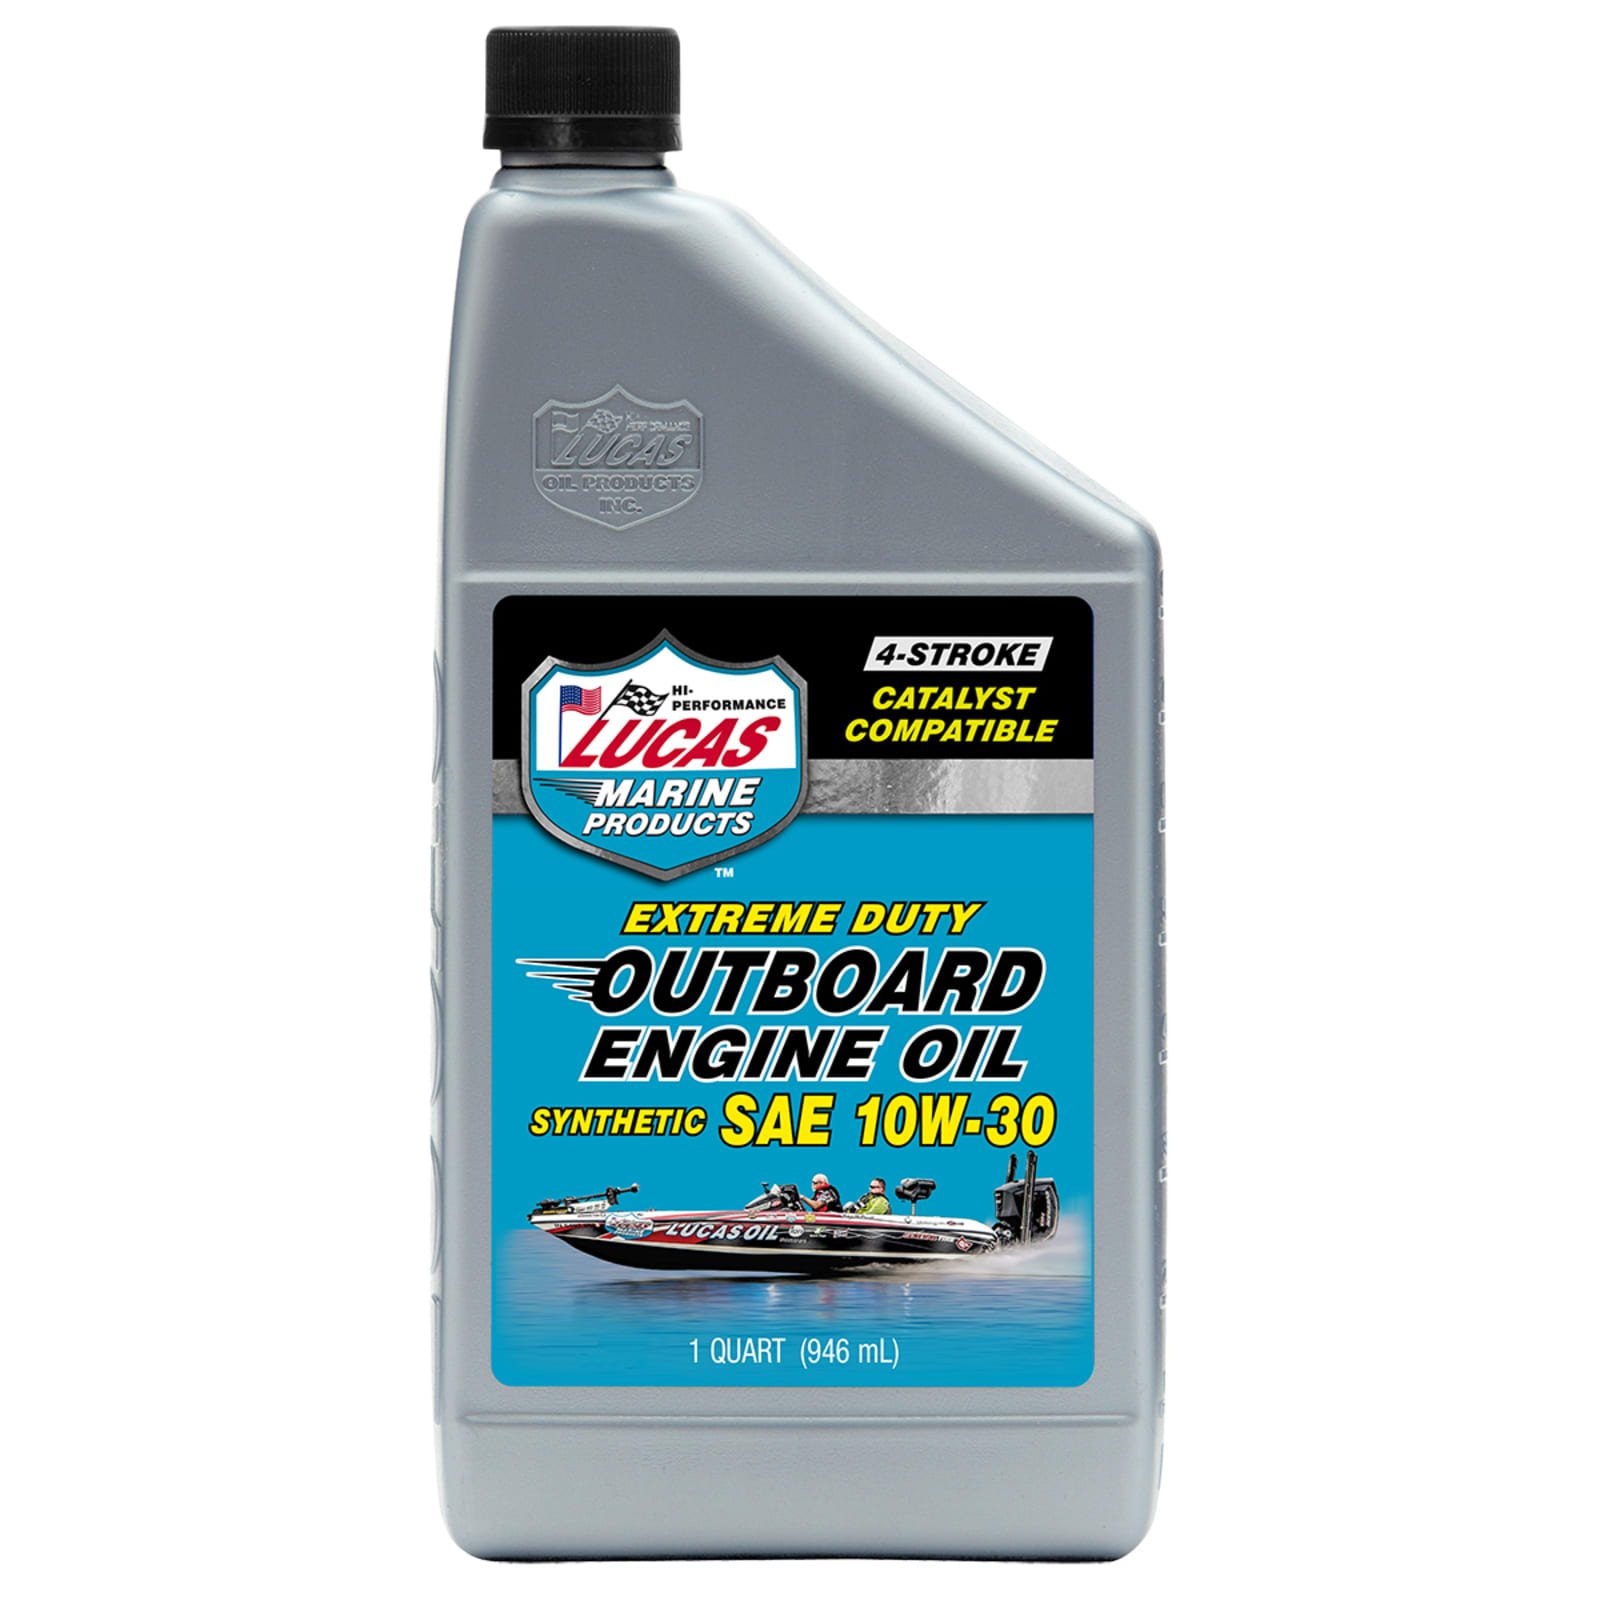 Synthetic SAE 10W-30 Outboard Engine Oil by Lucas Oil at Fleet Farm